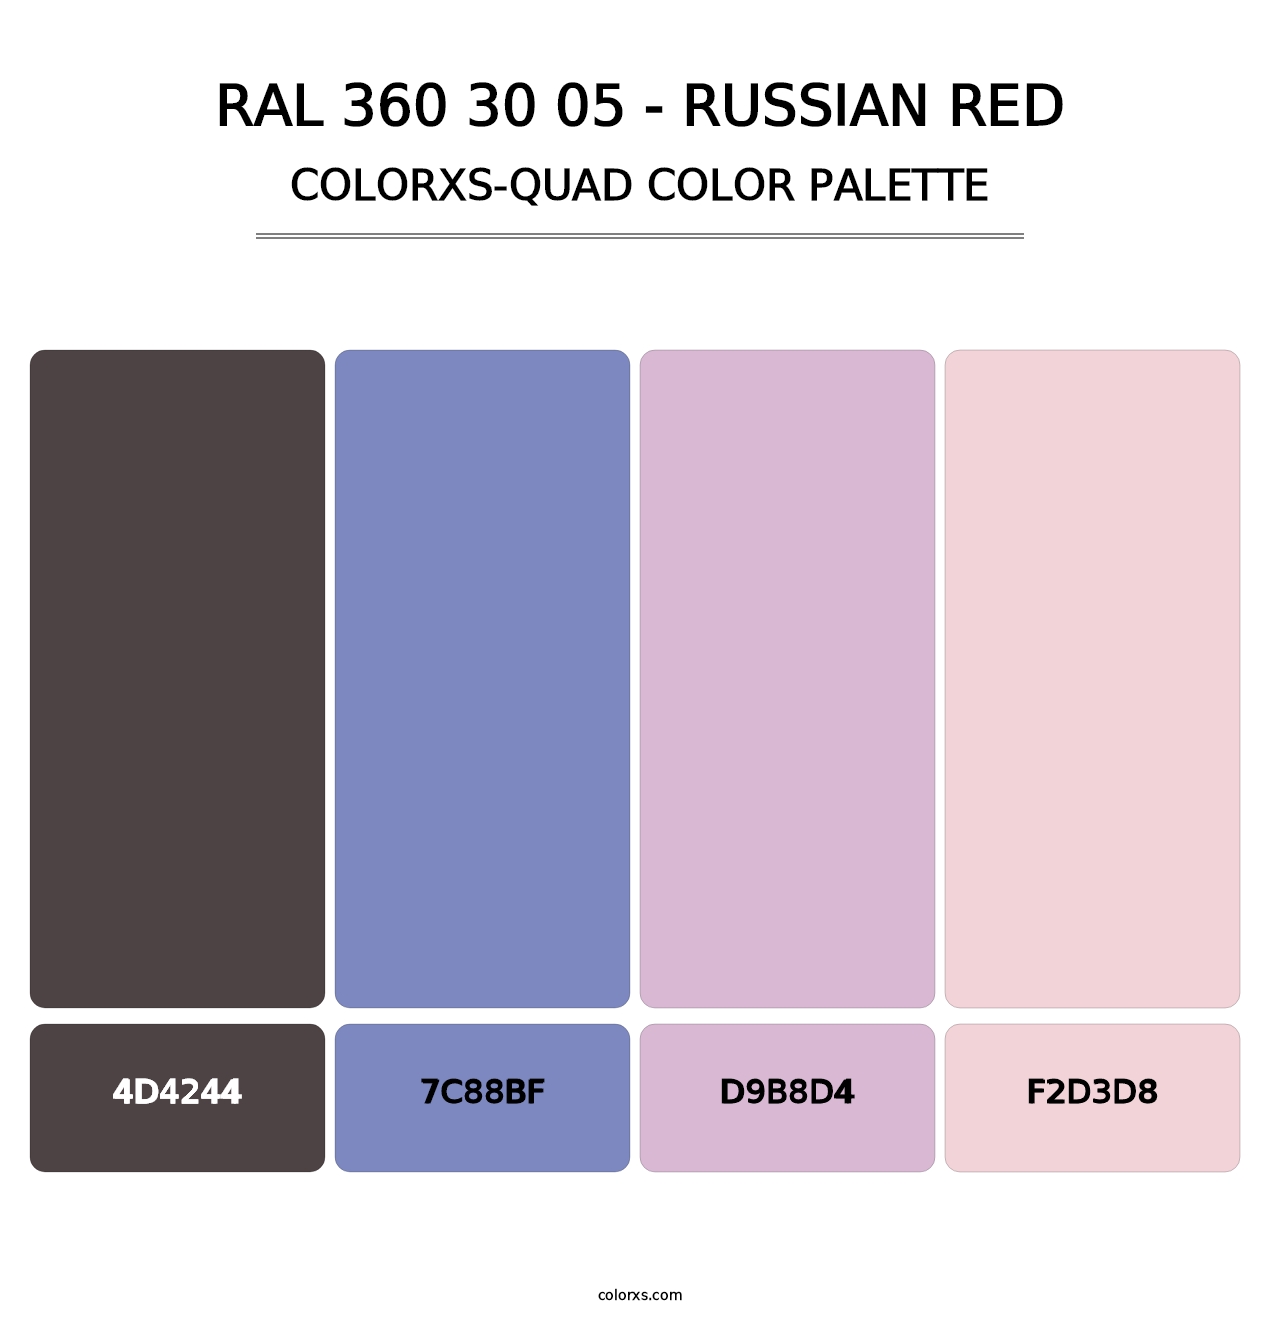 RAL 360 30 05 - Russian Red - Colorxs Quad Palette